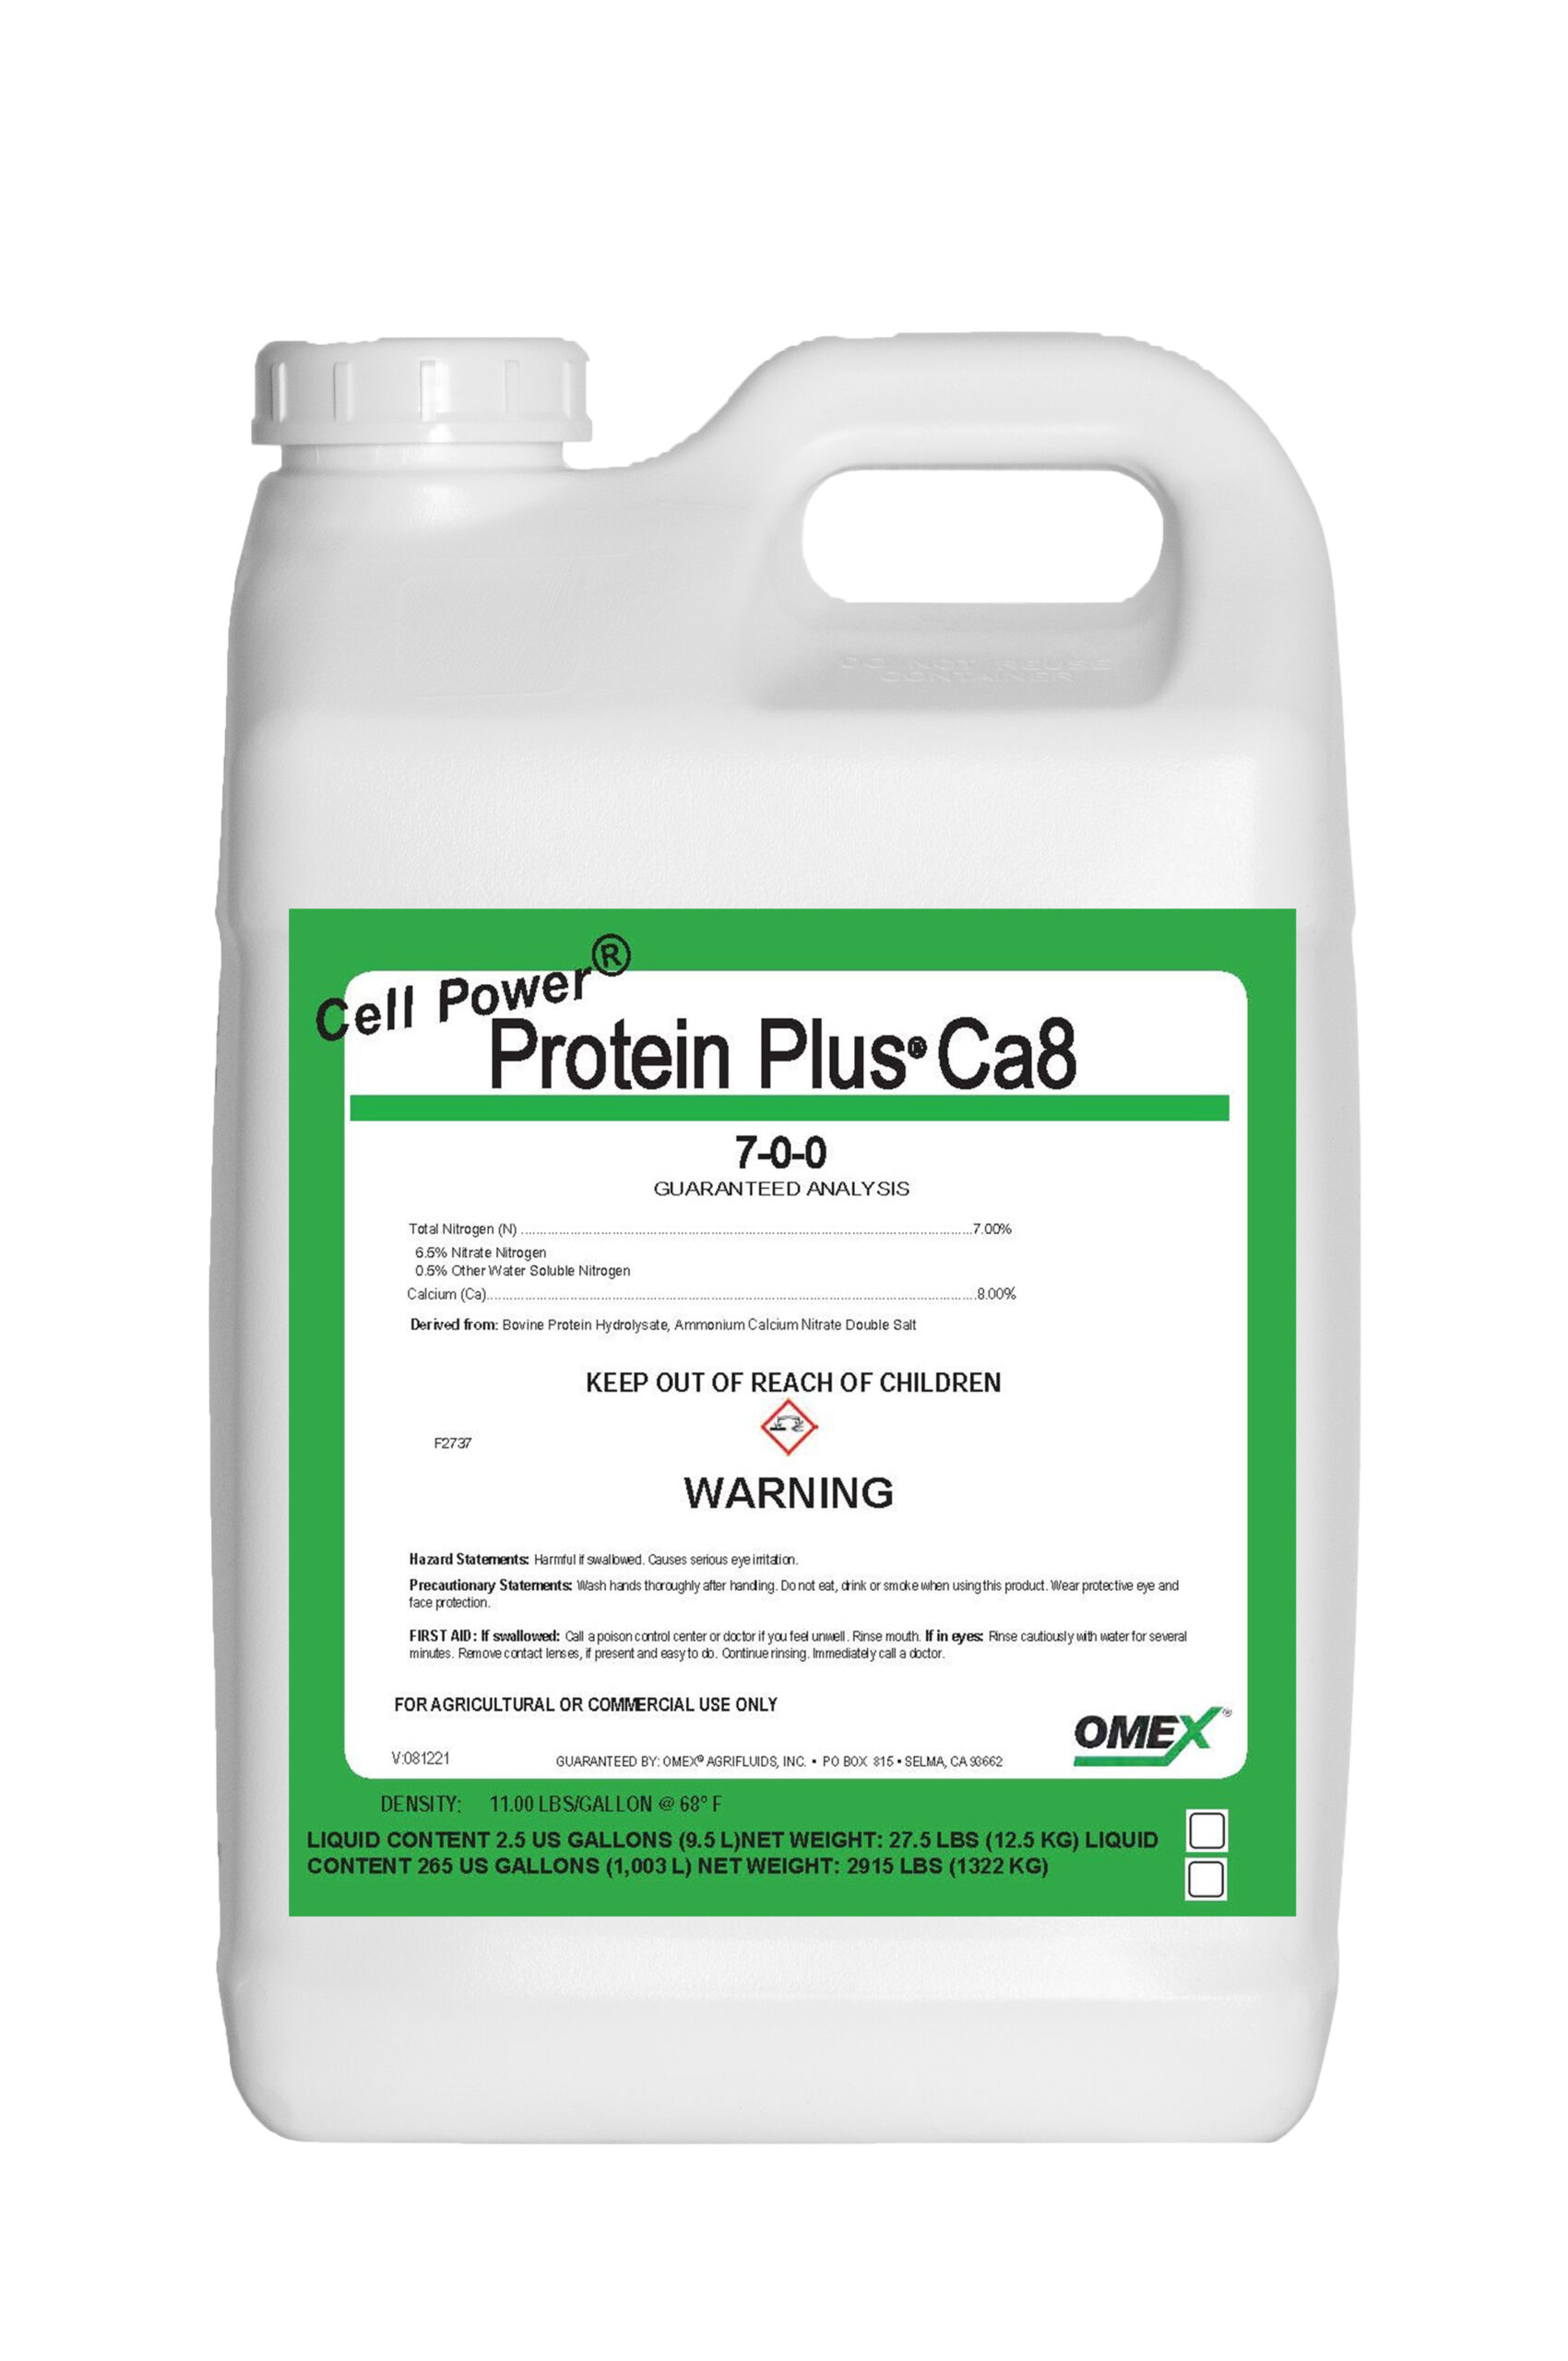 CELL POWER® Protein Plus® Ca8 7-0-0